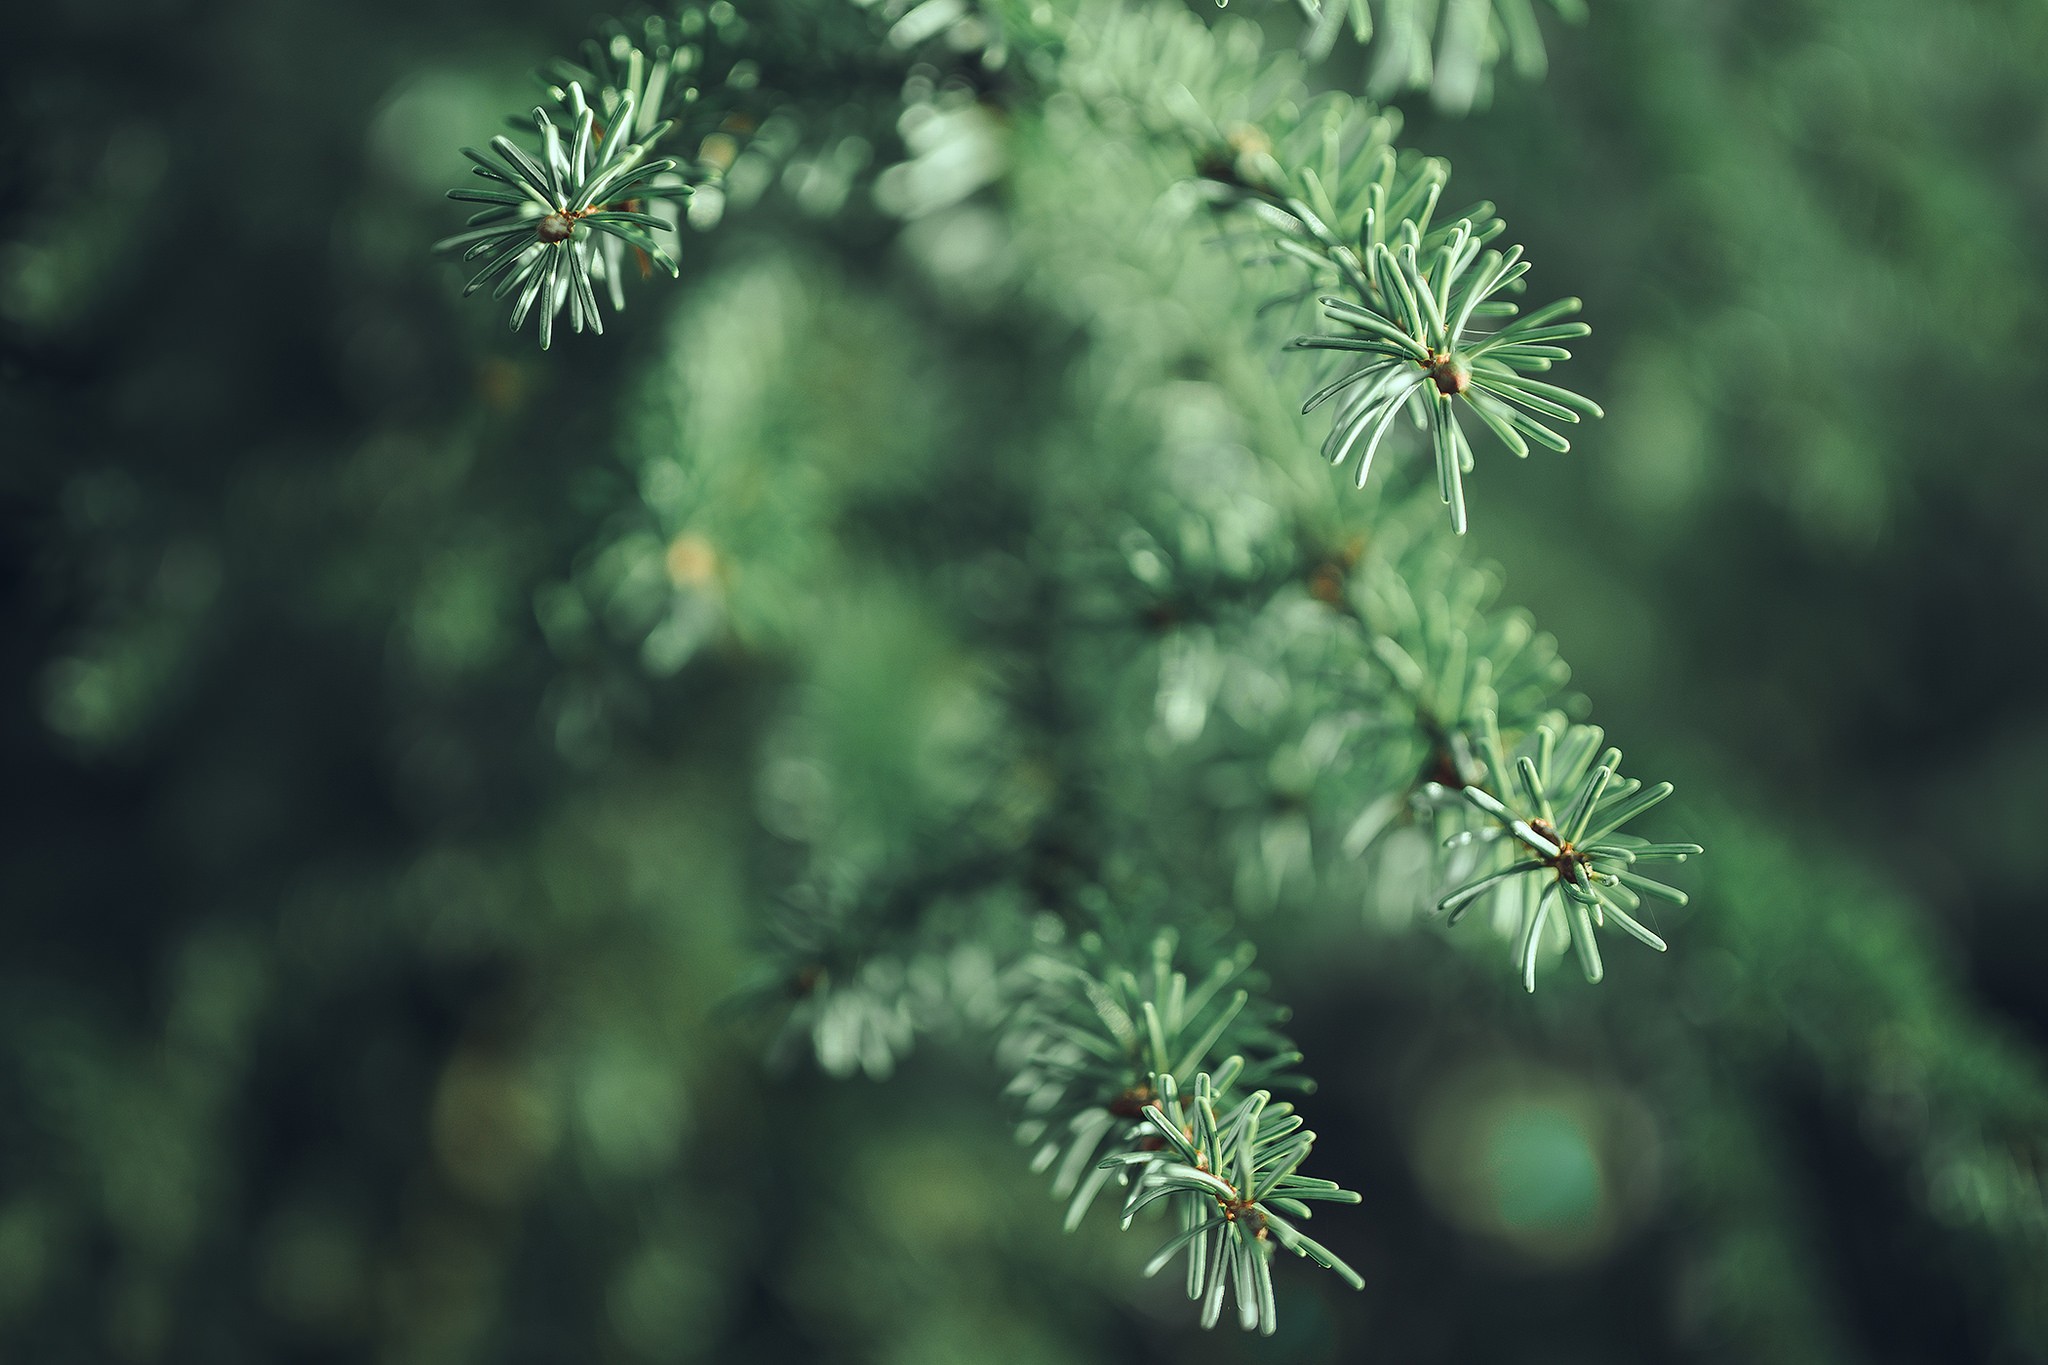 General 2048x1365 photography macro leaves spruce depth of field green plants